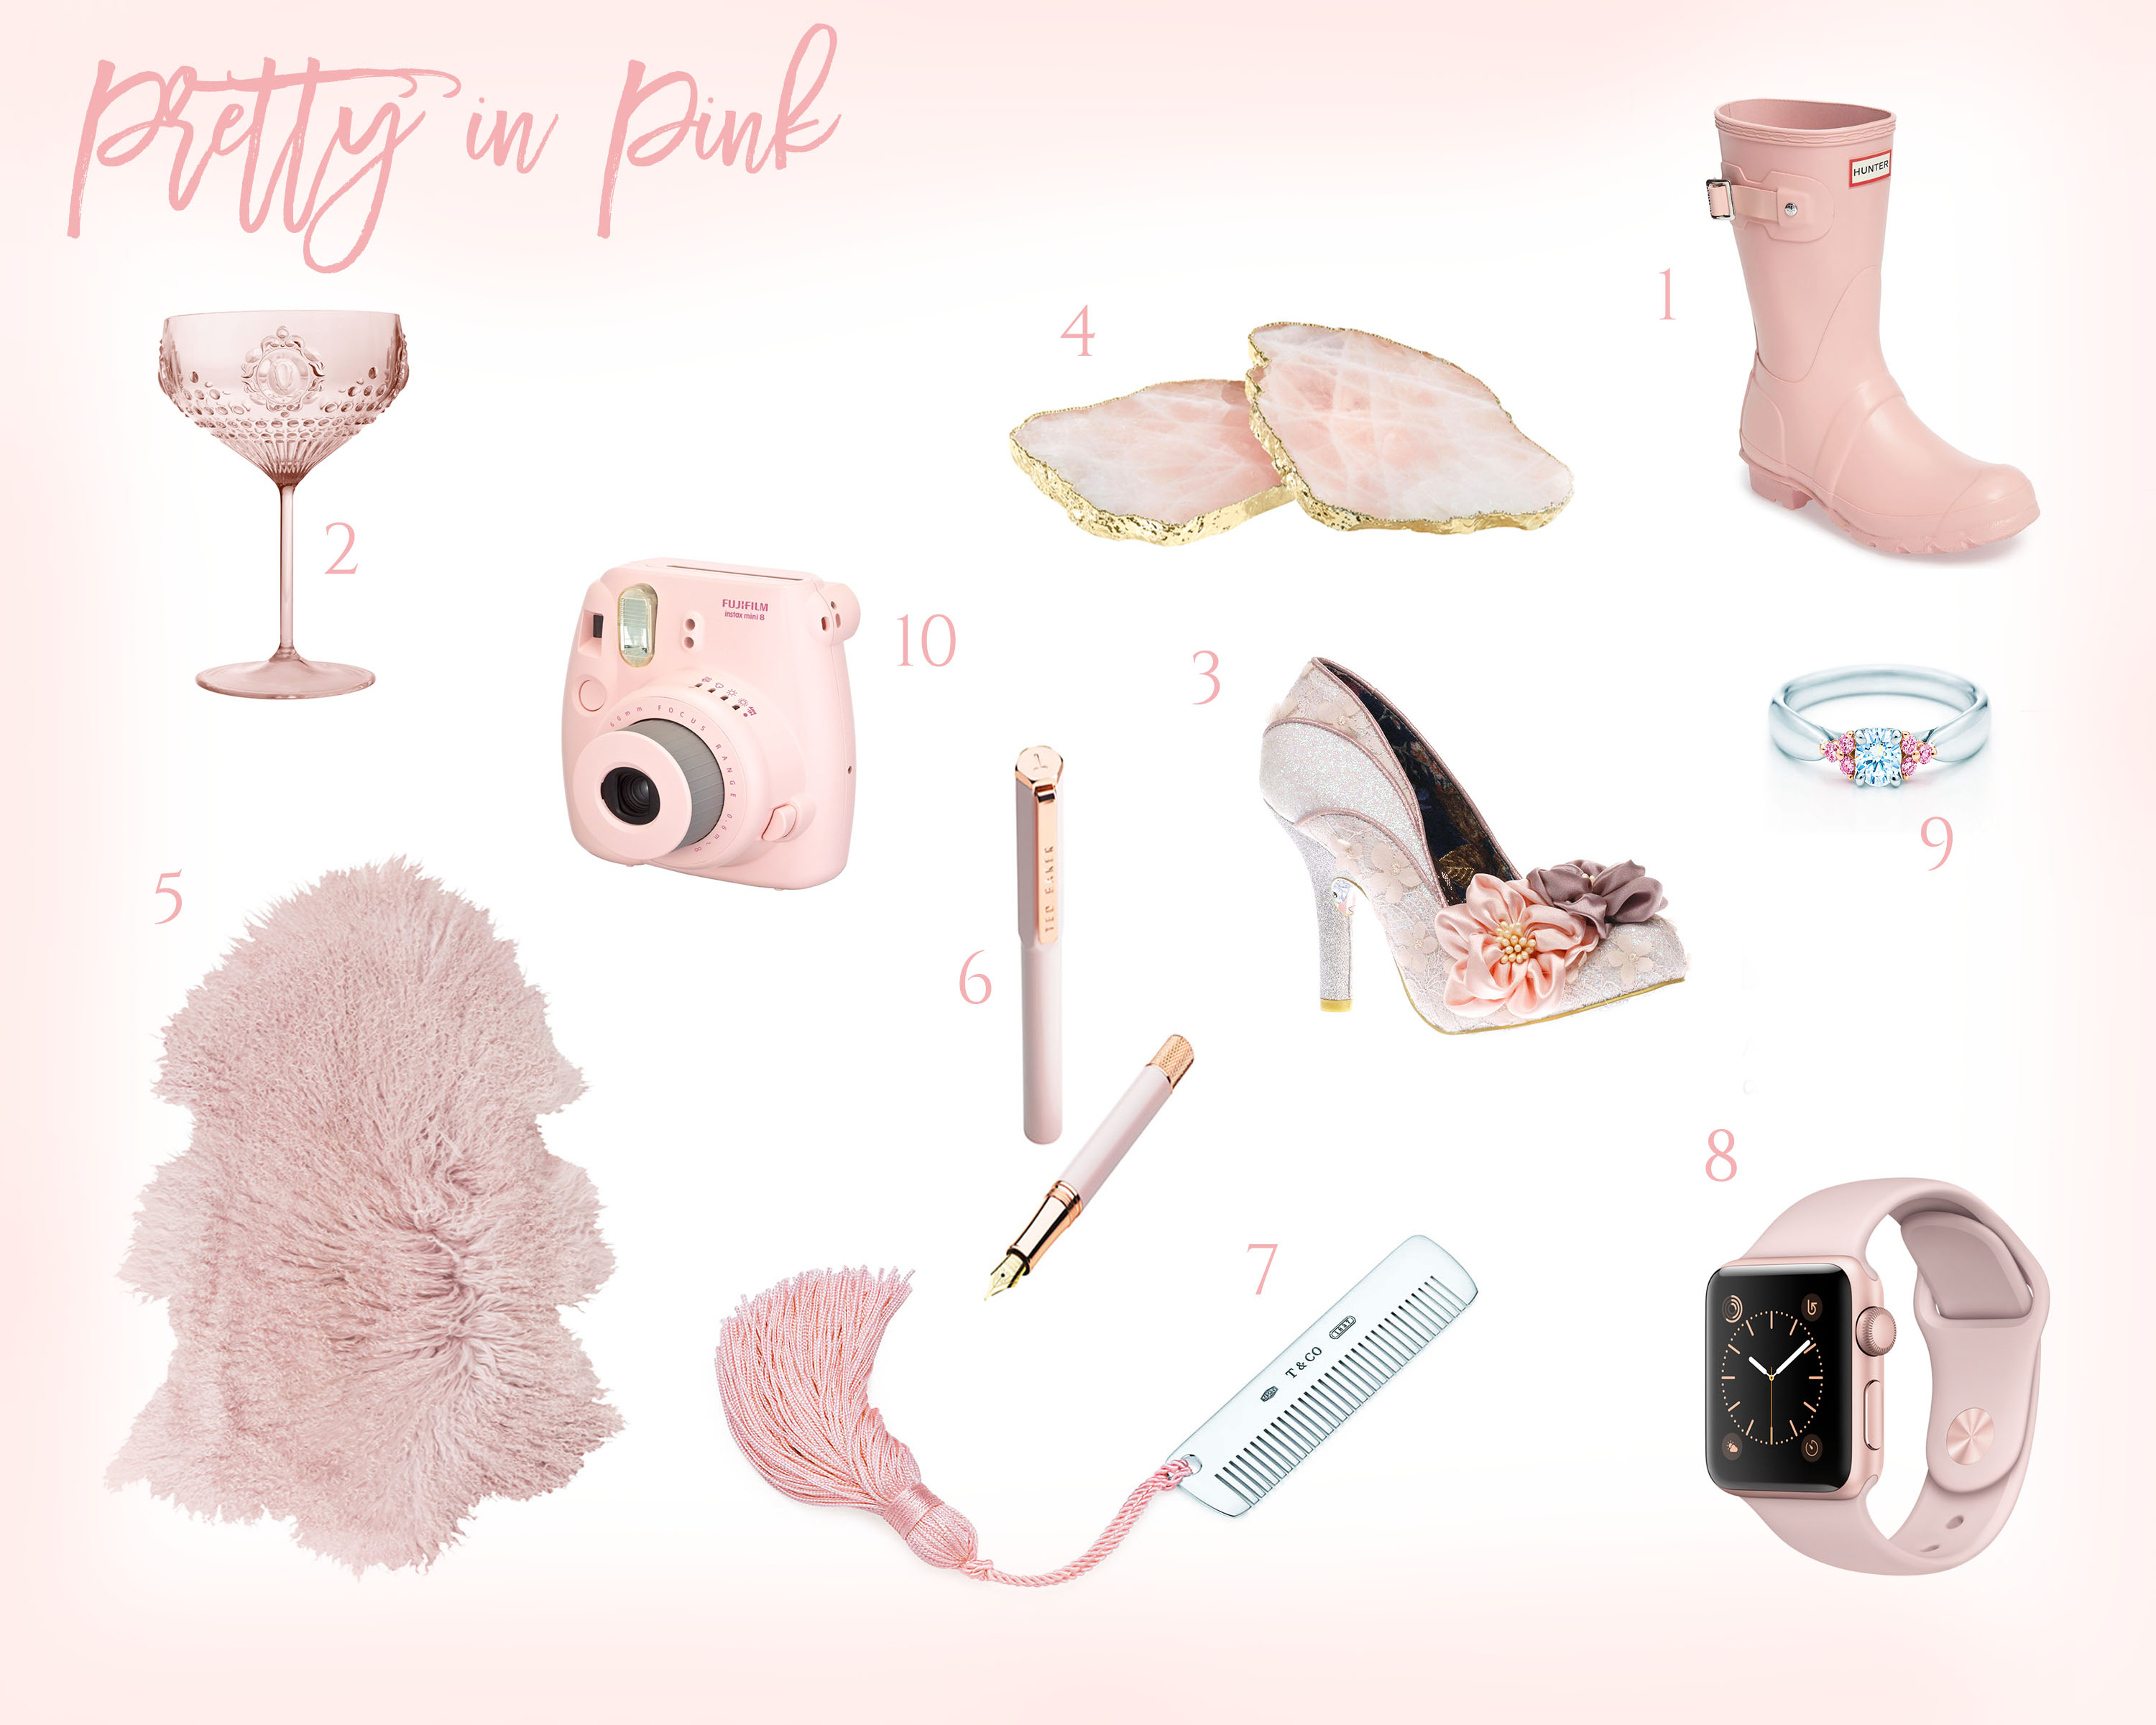 ST. VALENTINE’S DAY: PRETTY IN PINK GIFT GUIDE